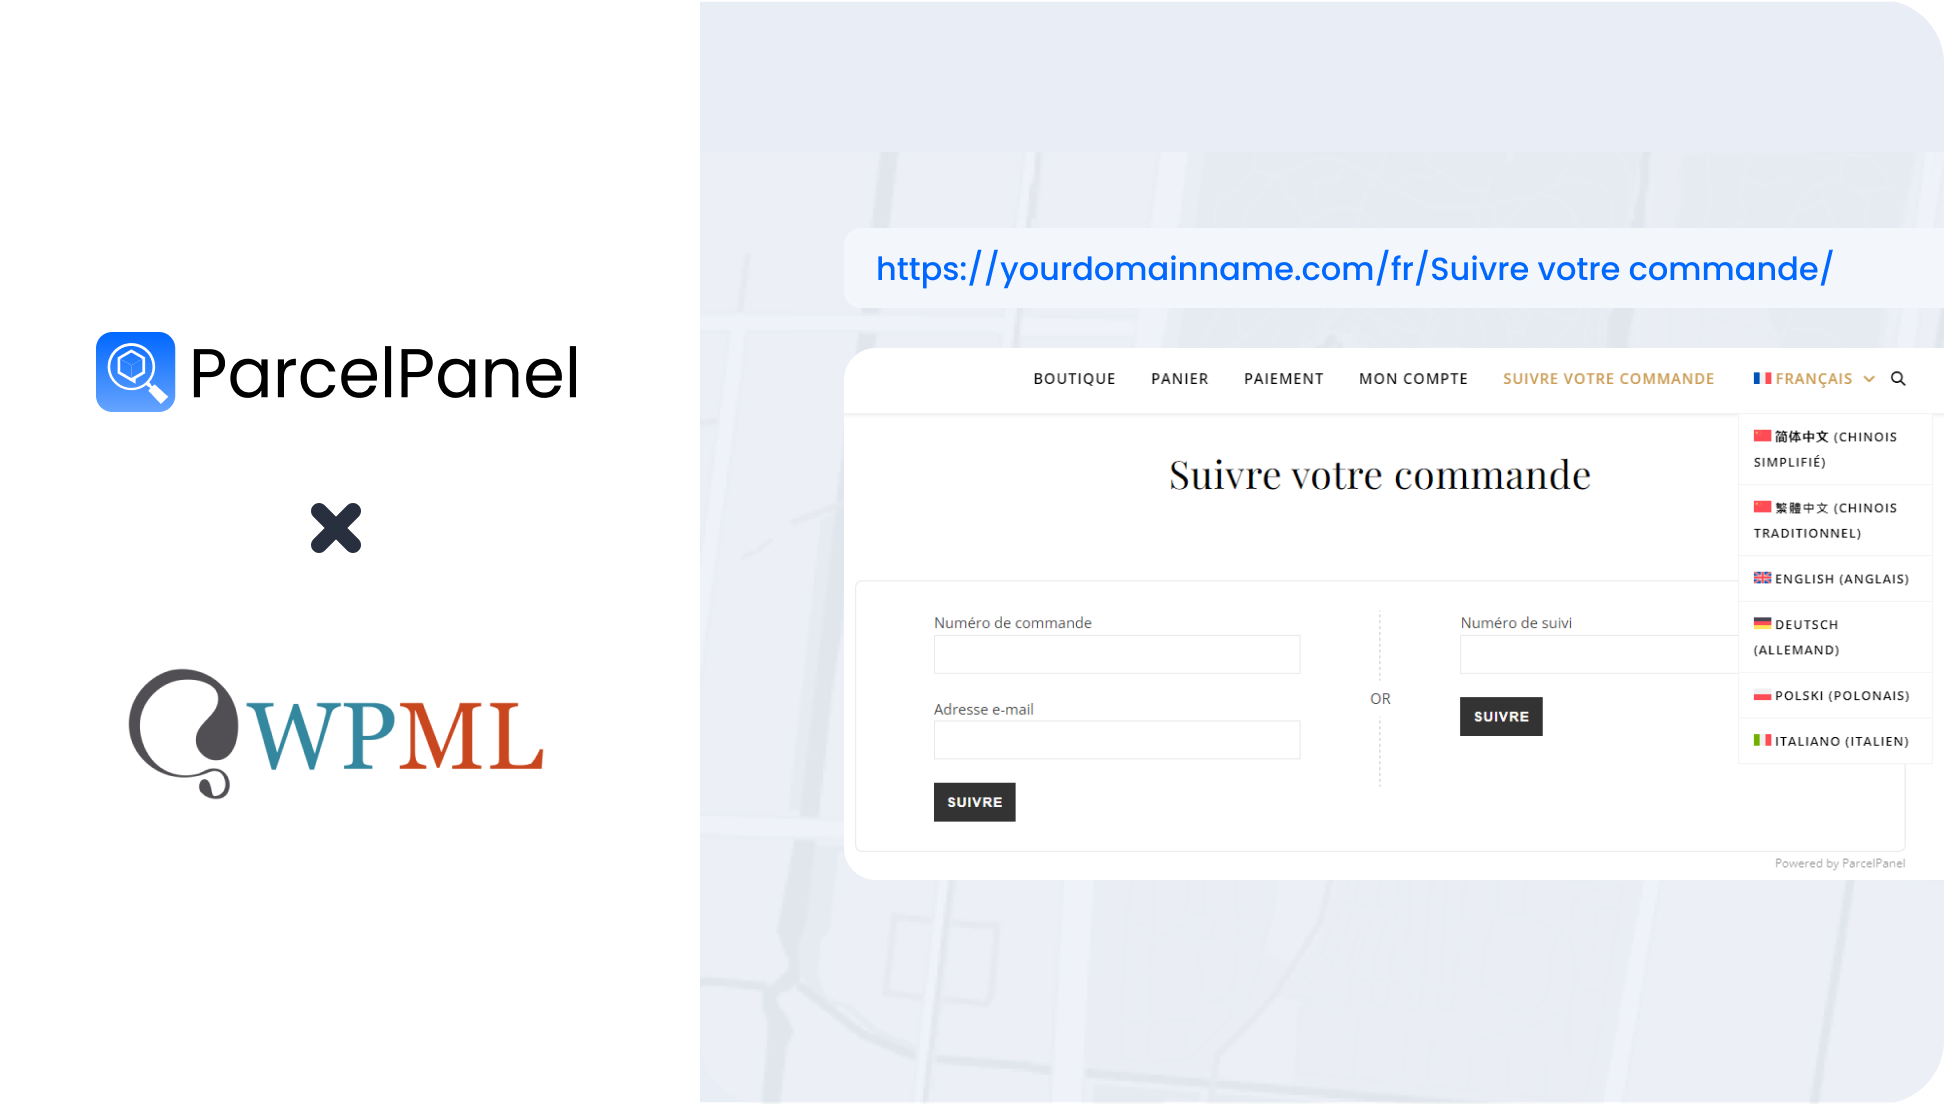 How to Use WPML to Turn ParcelPanel&#8217;s Tracking Page Multilingual?